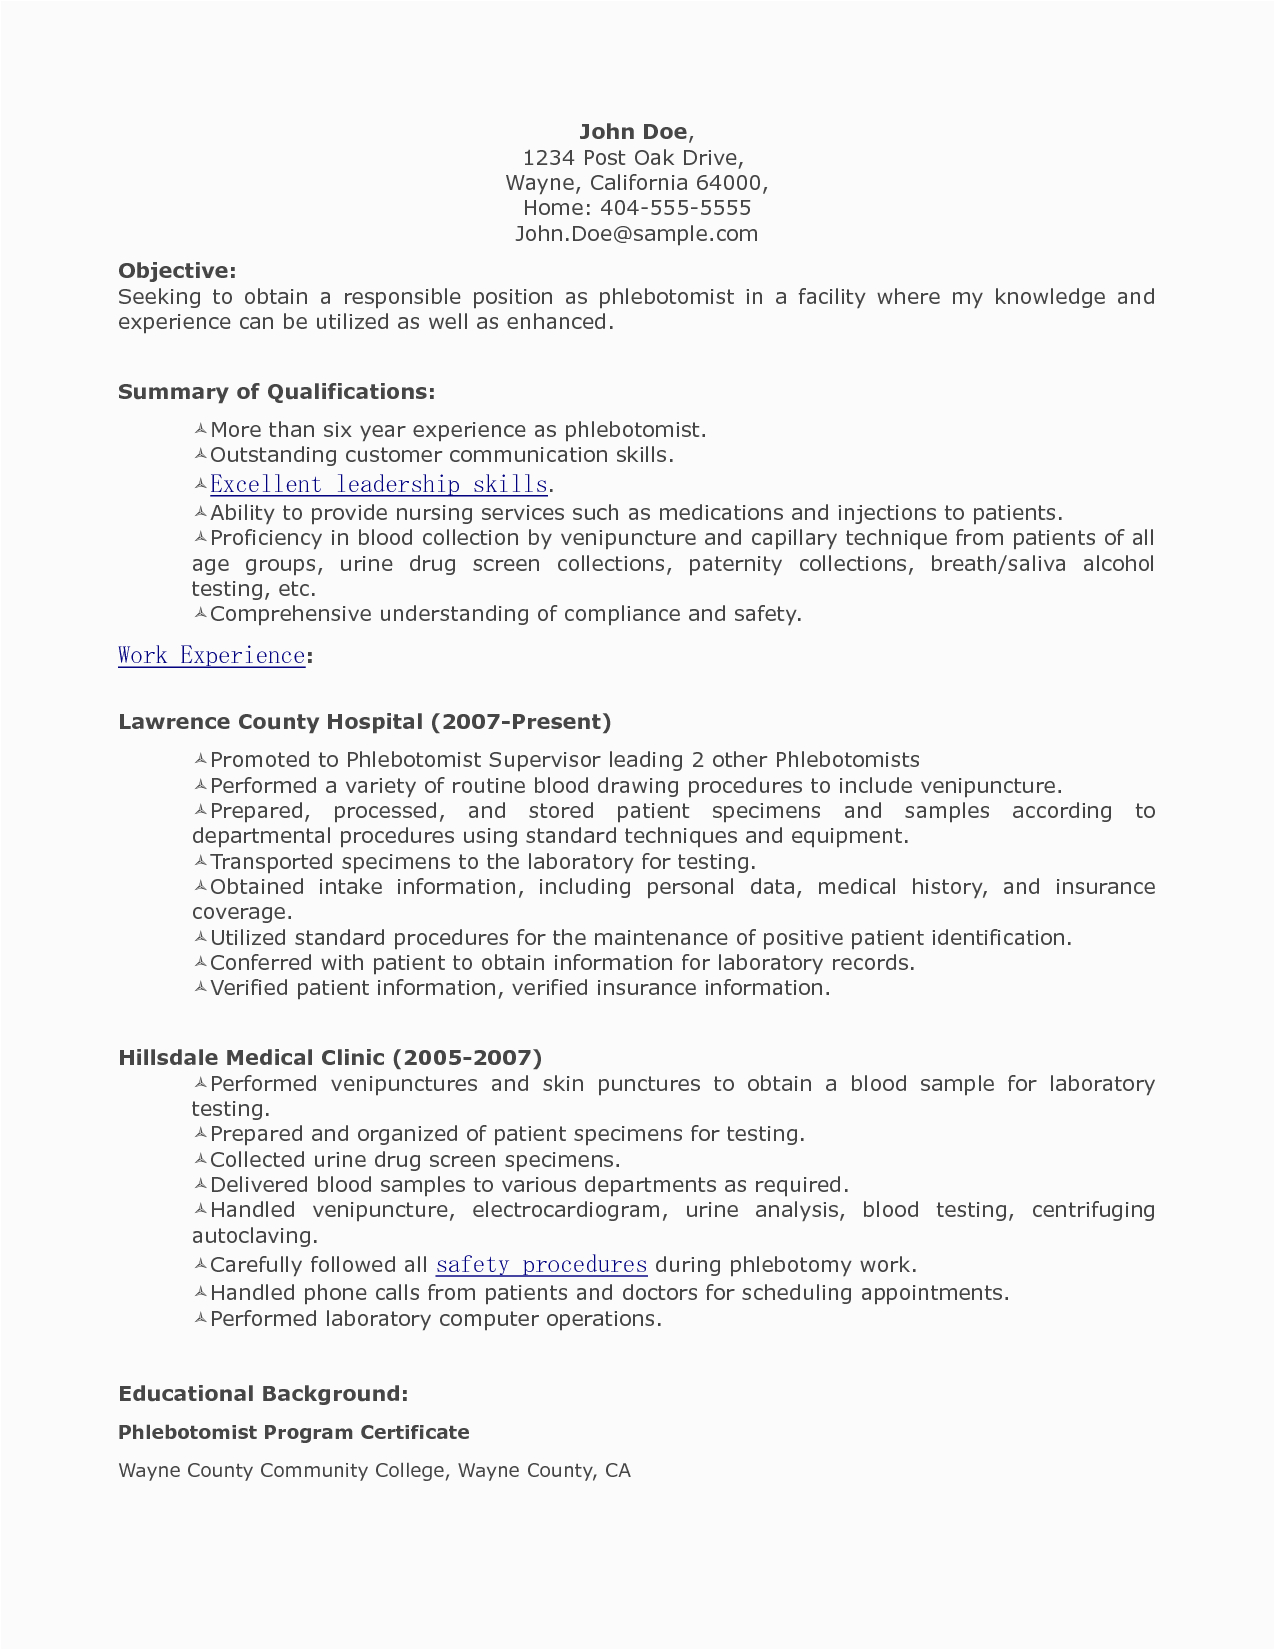 Sample Resume for Phlebotomist with Experience Resume Objectives for A Phlebotomist